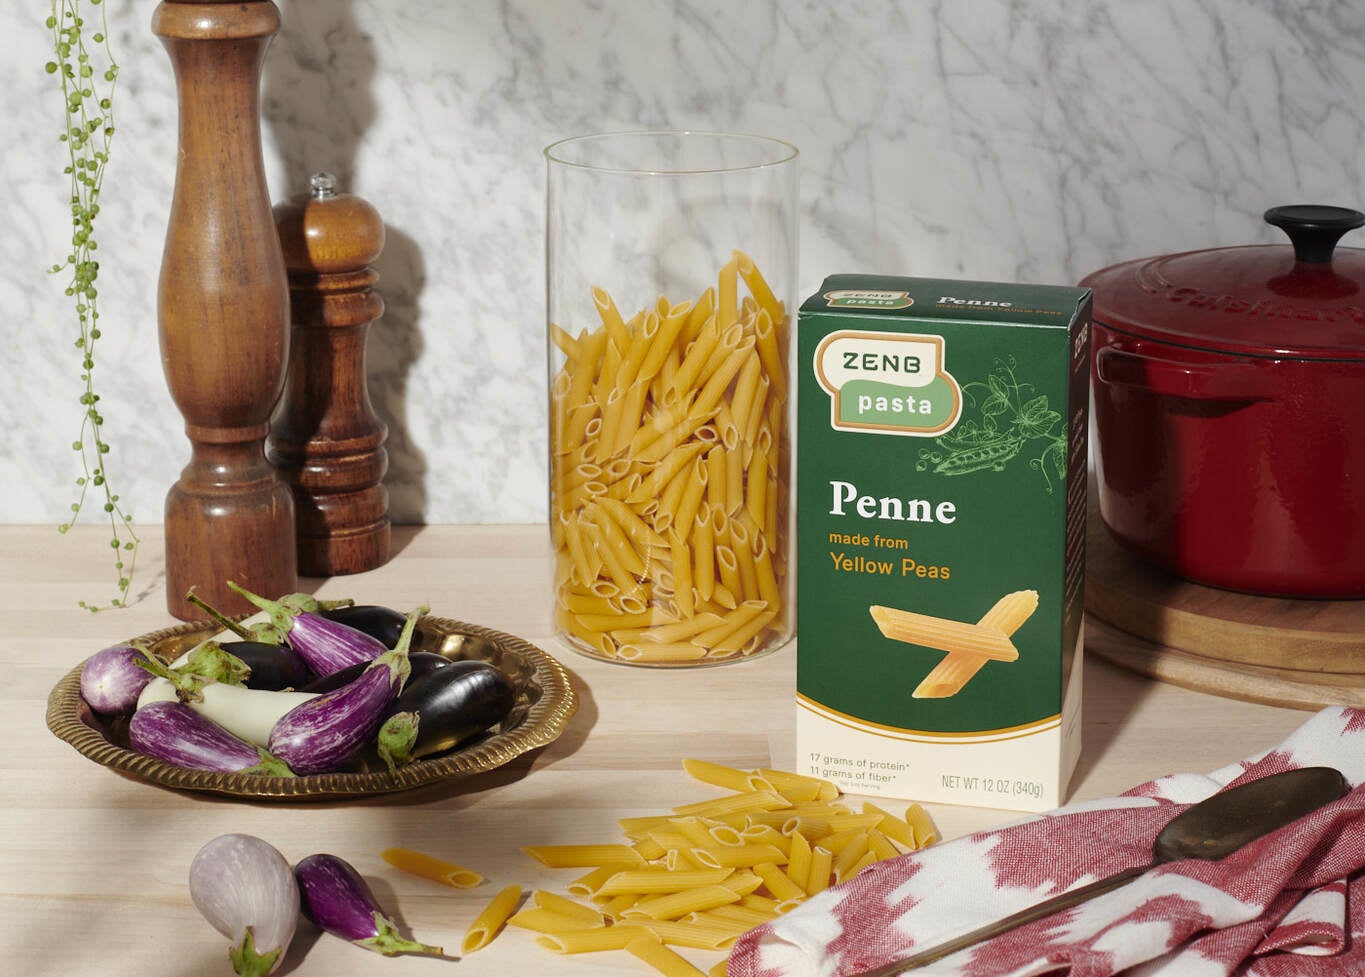 Penne noodles on kitchen counter